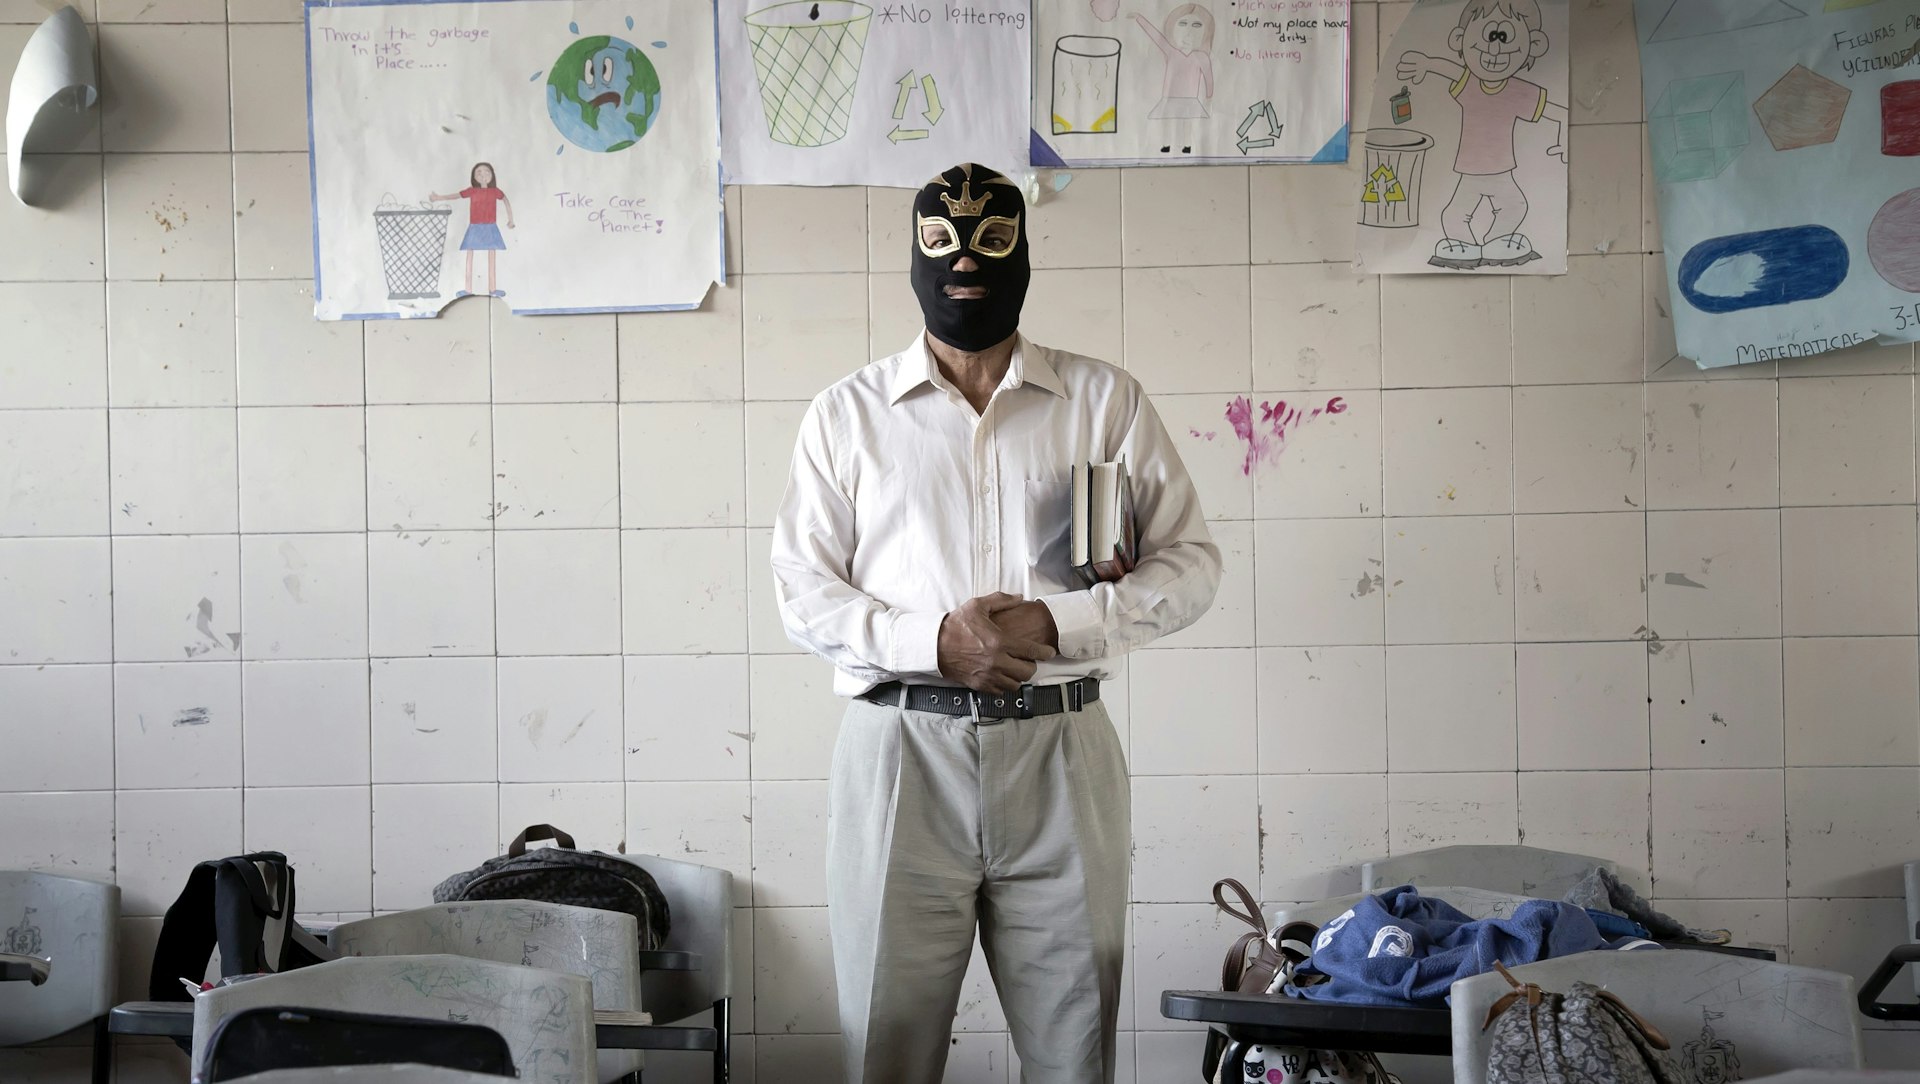 The mundane real lives of Mexico’s star wrestlers